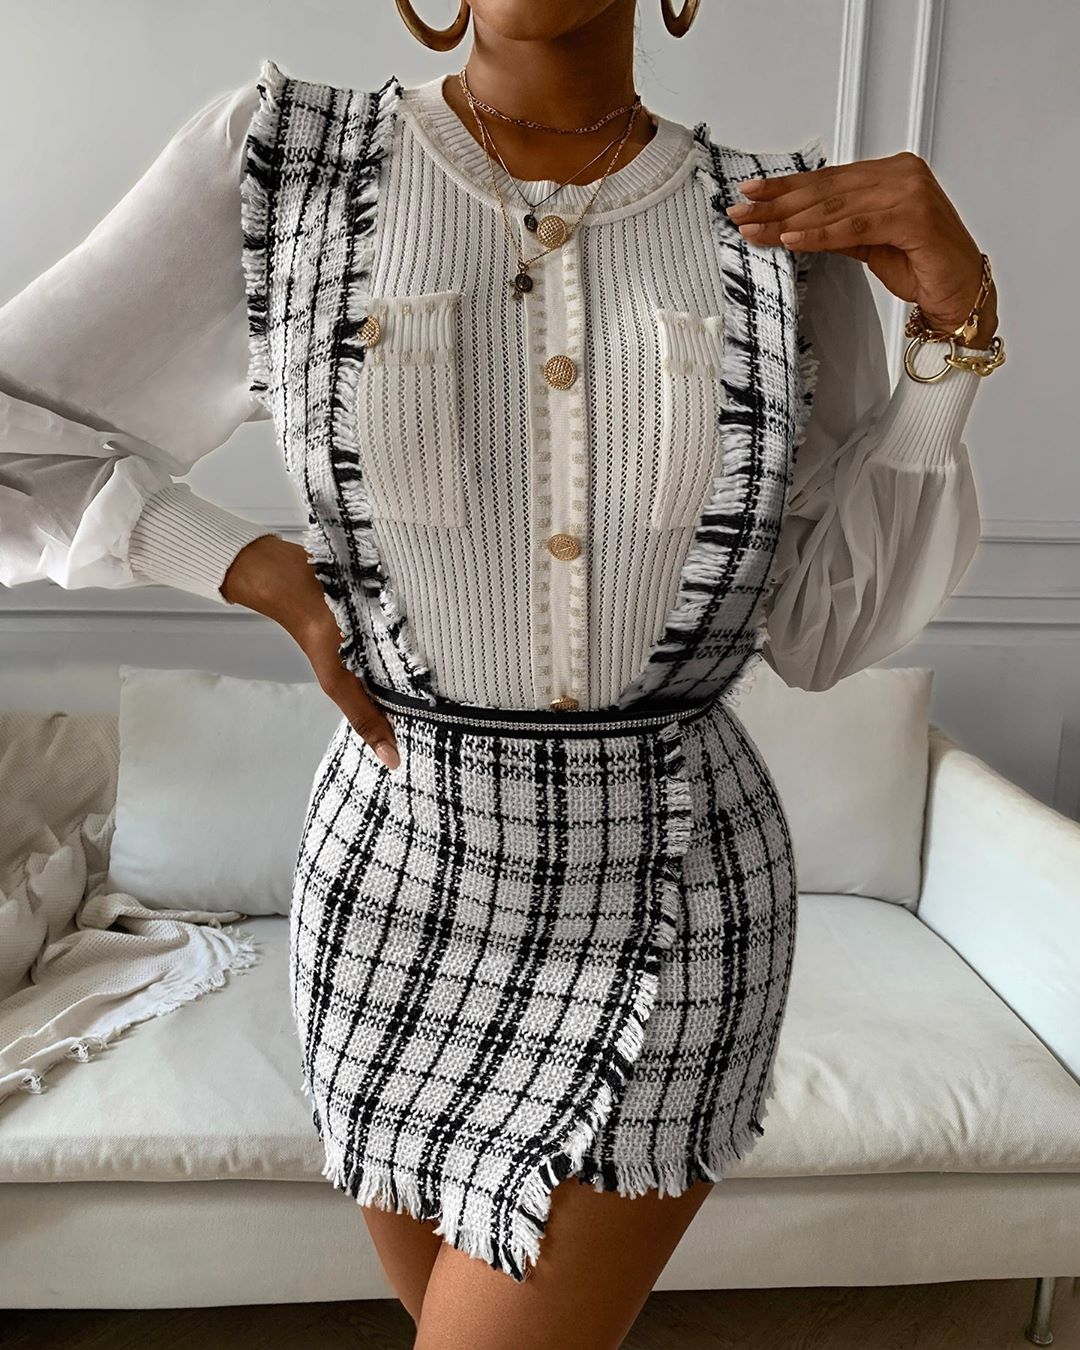 Chic Me - double tap if you’re ready to starting dressing for fall⁠
🔍"LZ6018"⁠
Shop: ChicMe.com⁠
⁠
#chicmeofficial #fashion #lovecurves #ootd #style #chic #fashionmoment